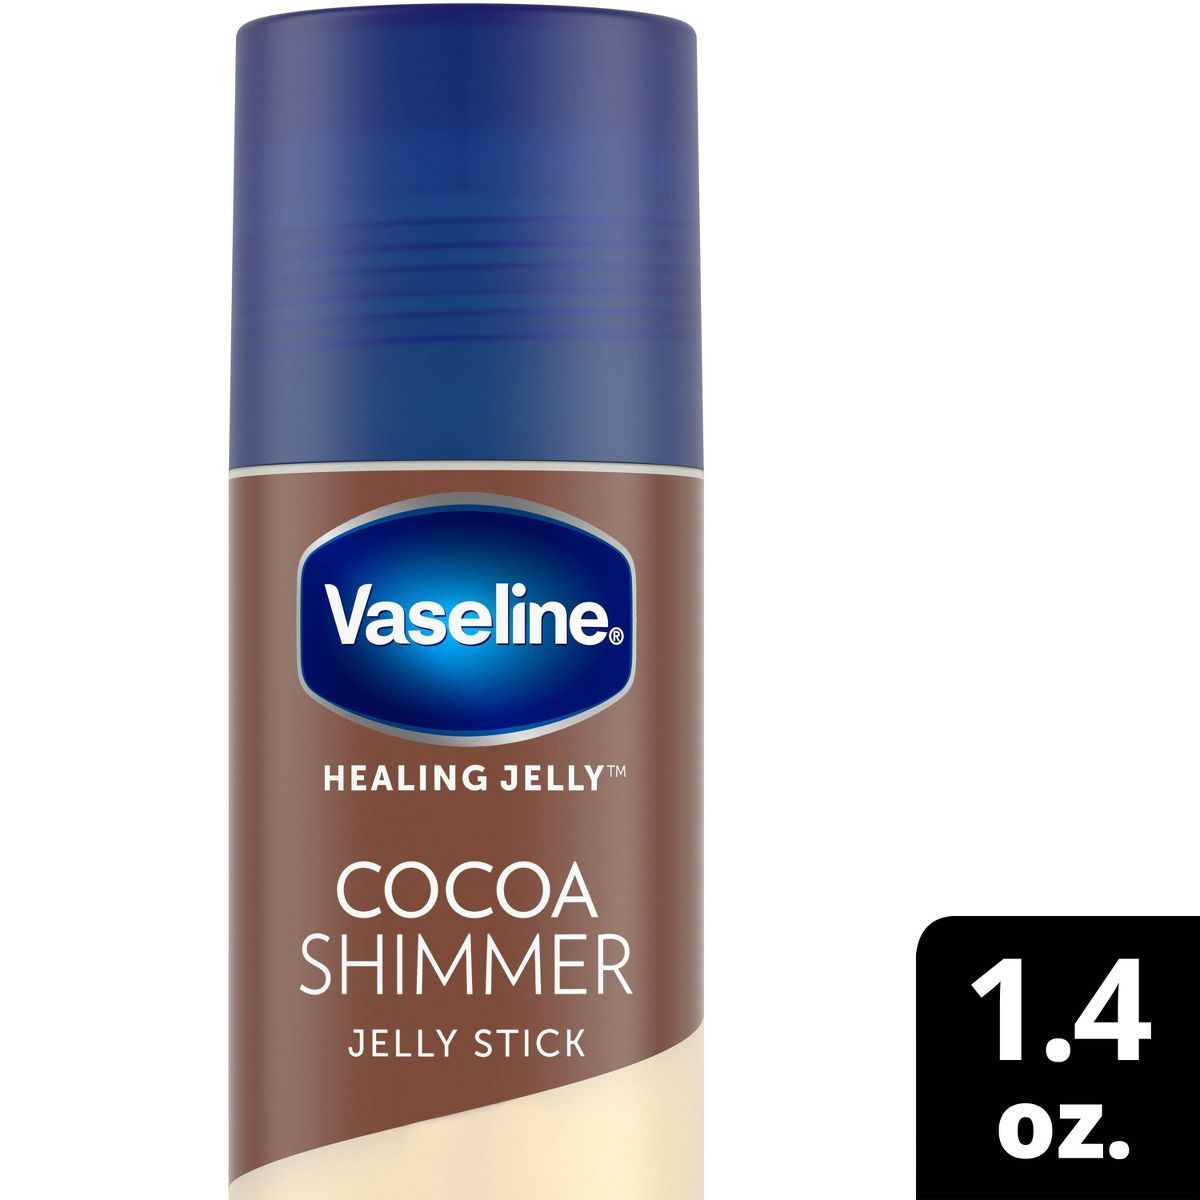 Vaseline Cocoa Shimmer Jelly Stick Cocoa Butter - 1.4oz | Target